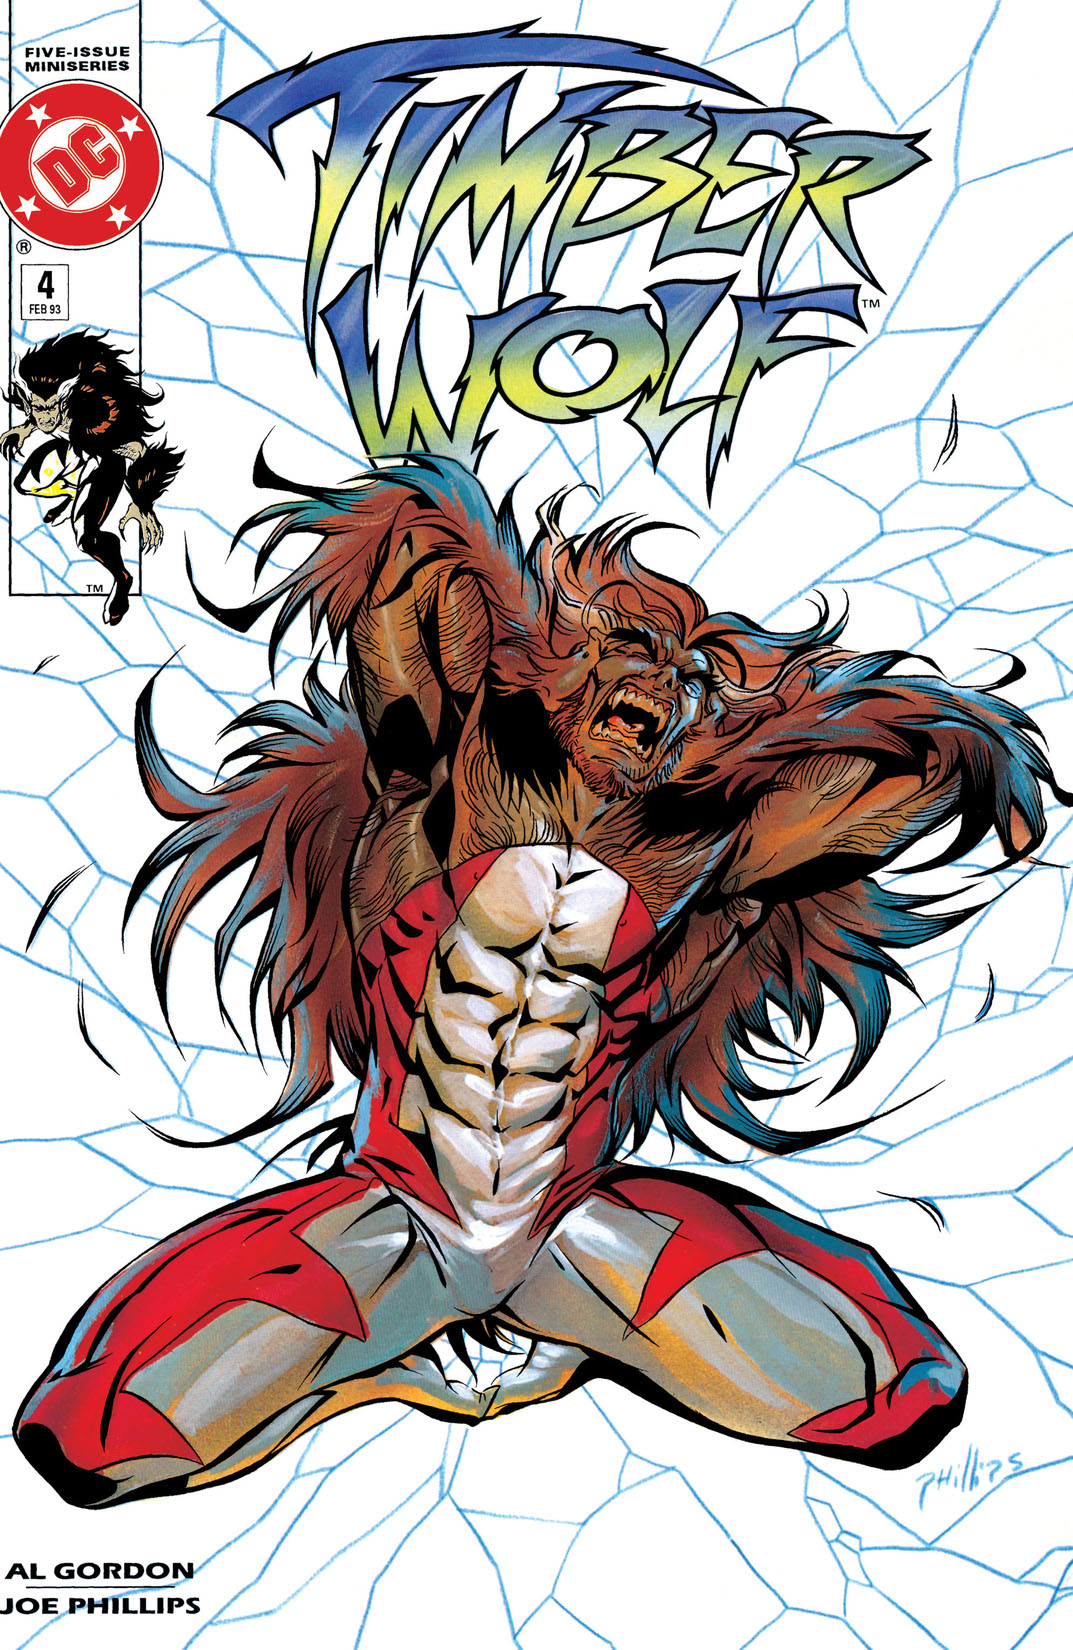 Timber Wolf #4 preview images